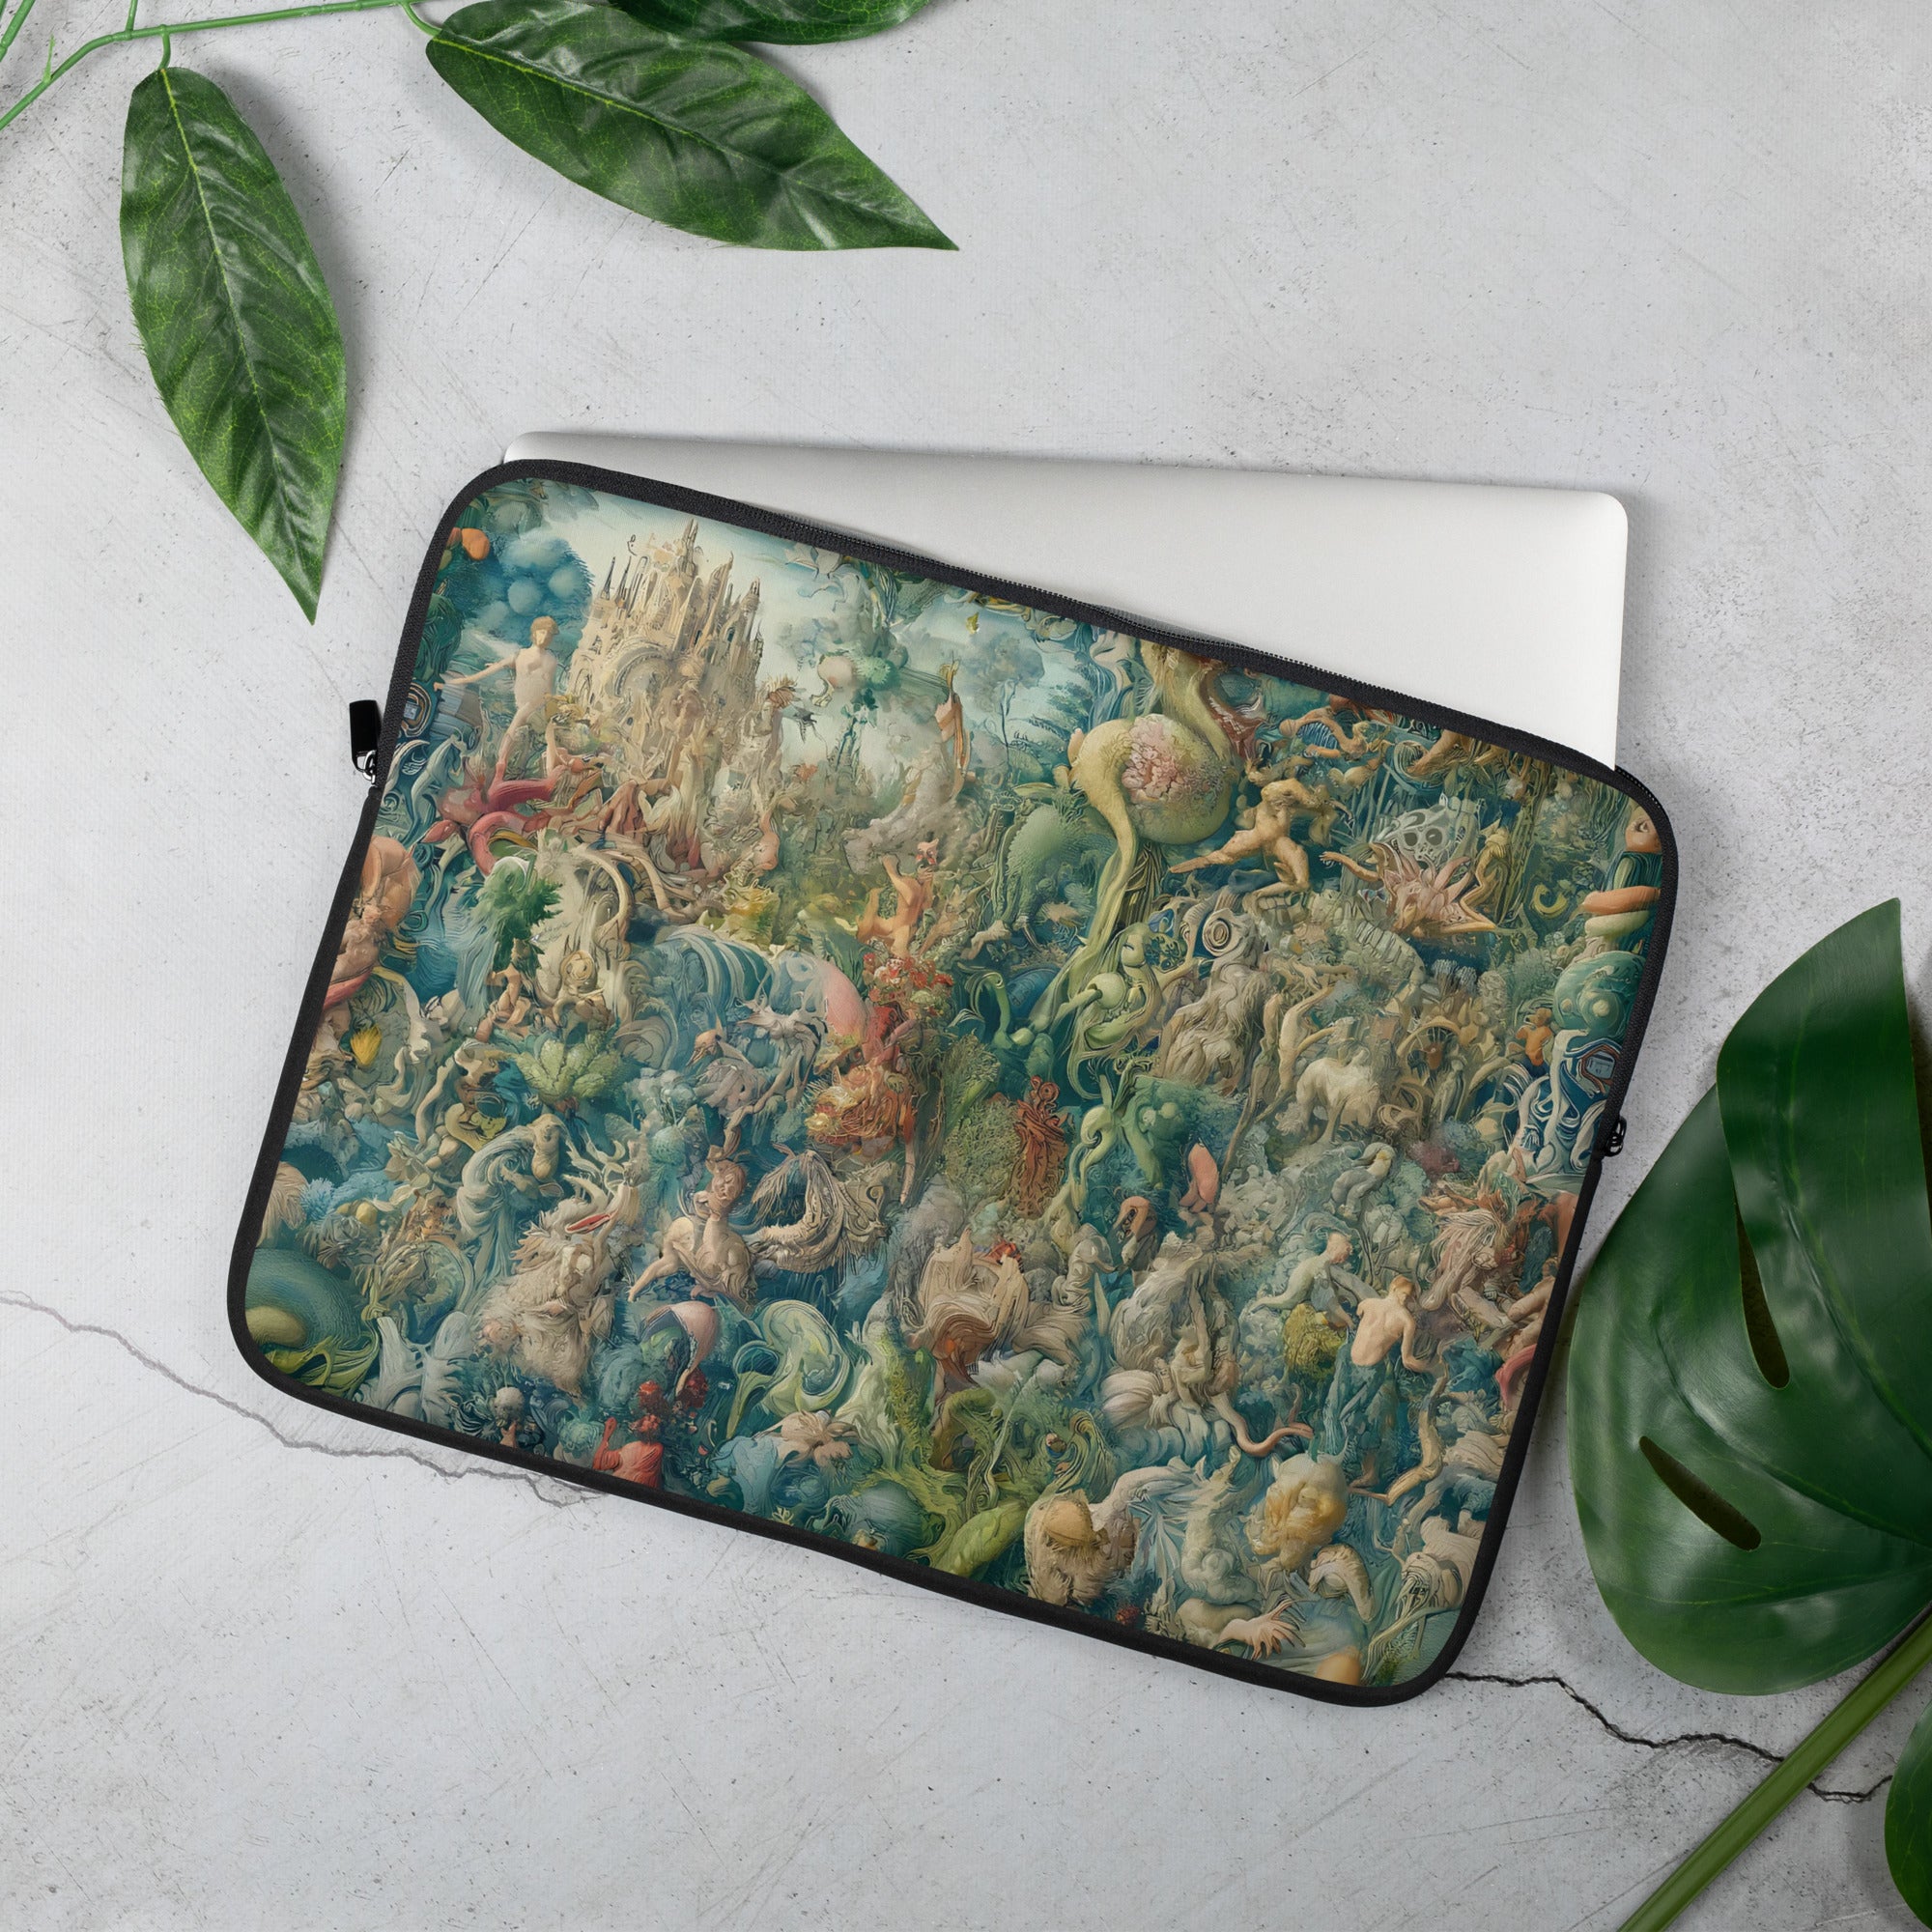 Hieronymus Bosch 'The Garden of Earthly Delights' Famous Painting Laptop Sleeve | Premium Art Laptop Sleeve